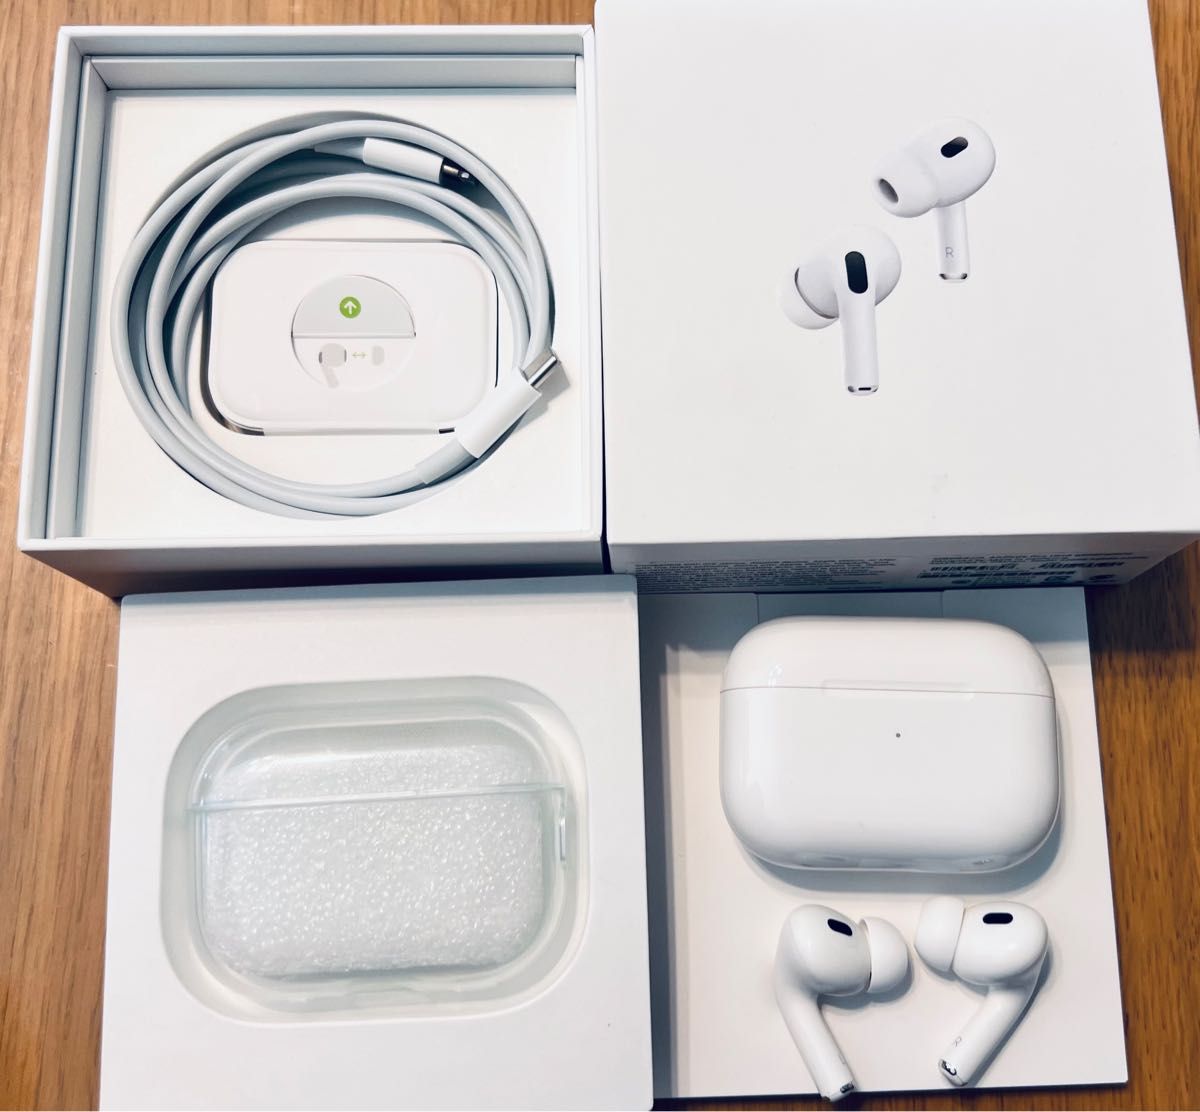 Apple AirPods Pro（第2世代） ​​​​​​​新品！オマケも。-